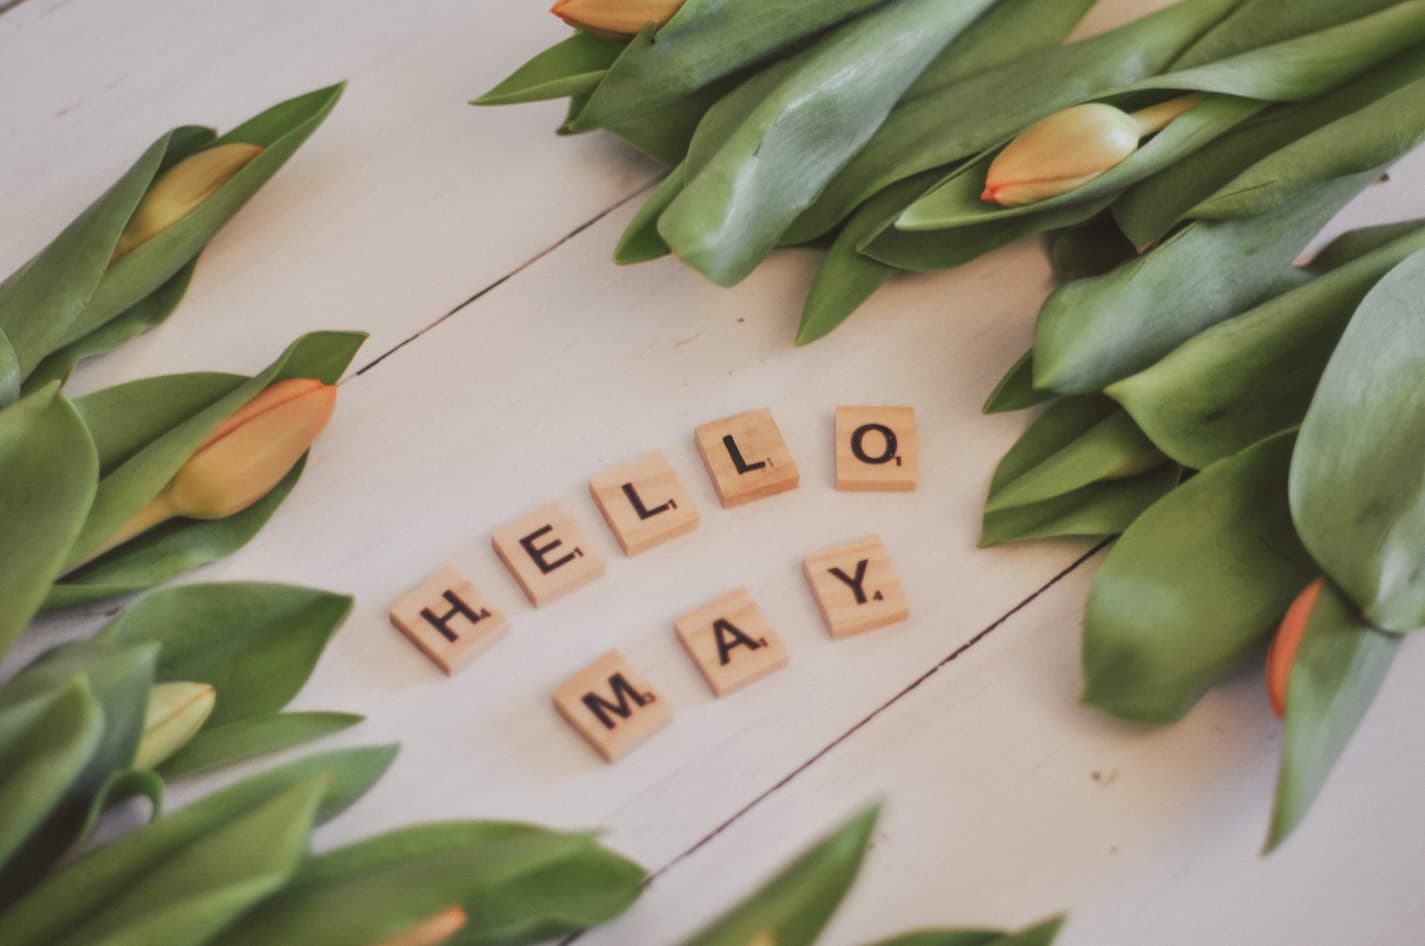 an image of wooden letter tiles spelling out hello may next to flowers budding